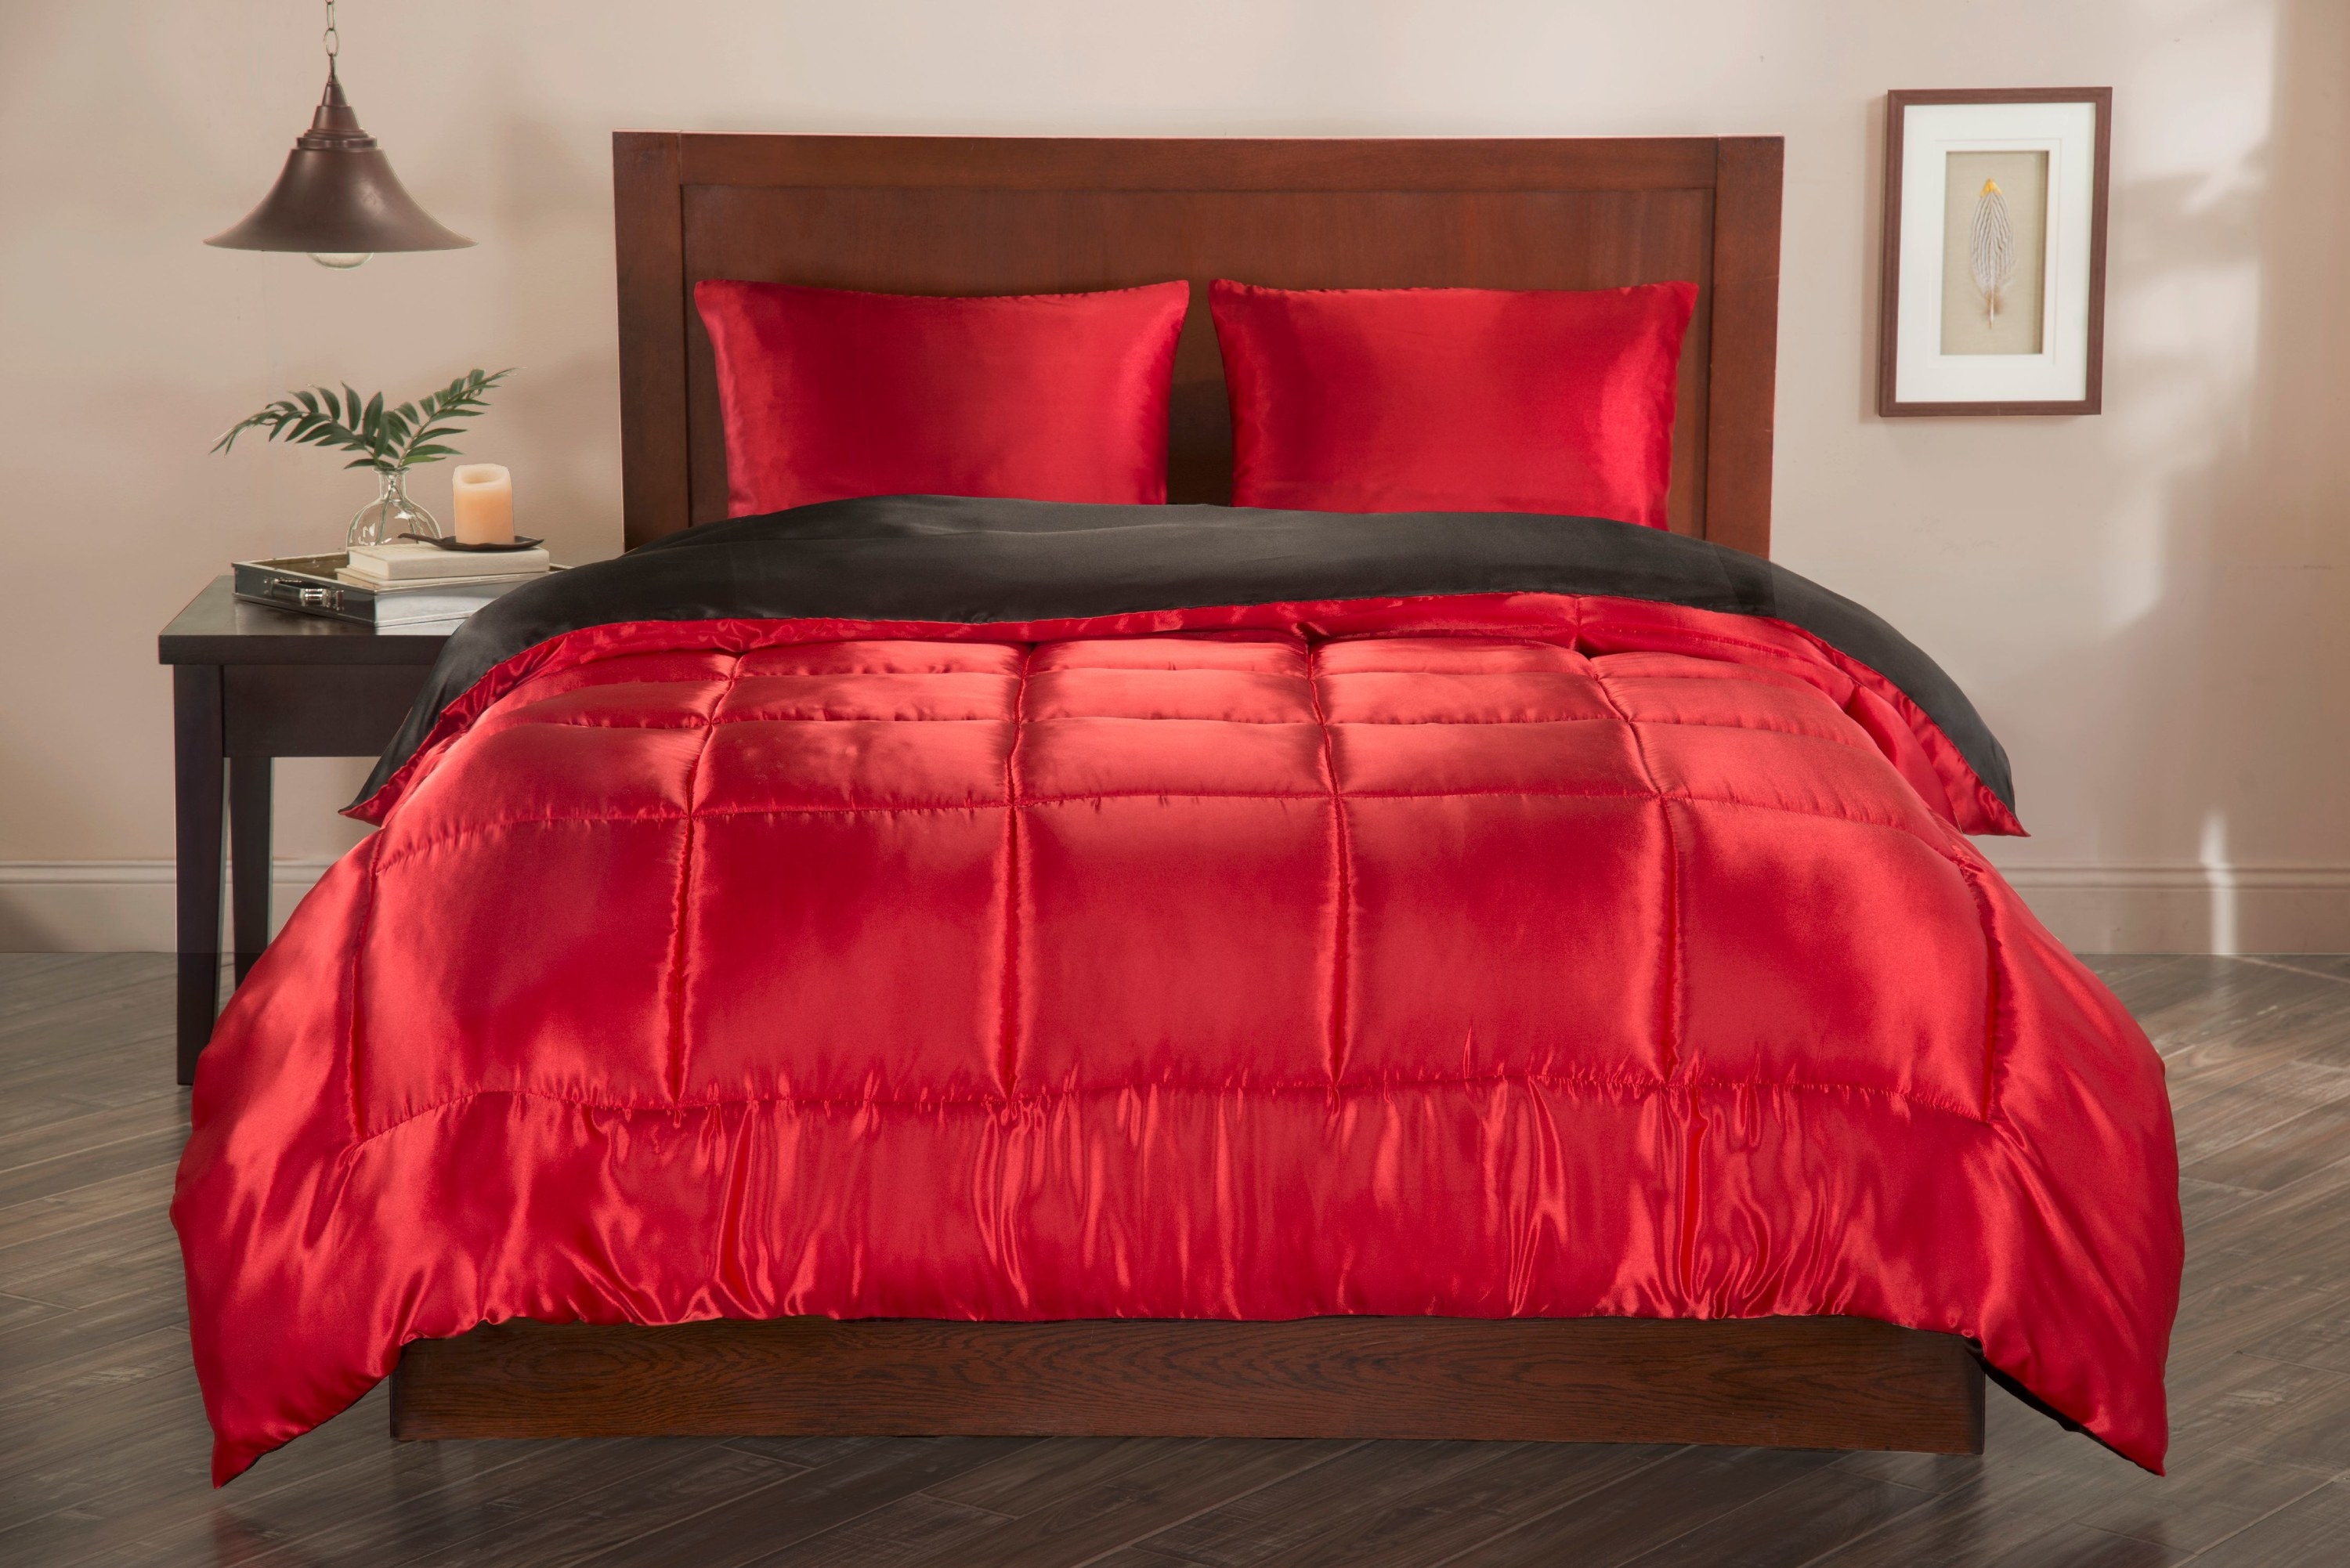 The red and black bedding on a bed. It&#x27;s shiny and awesome.